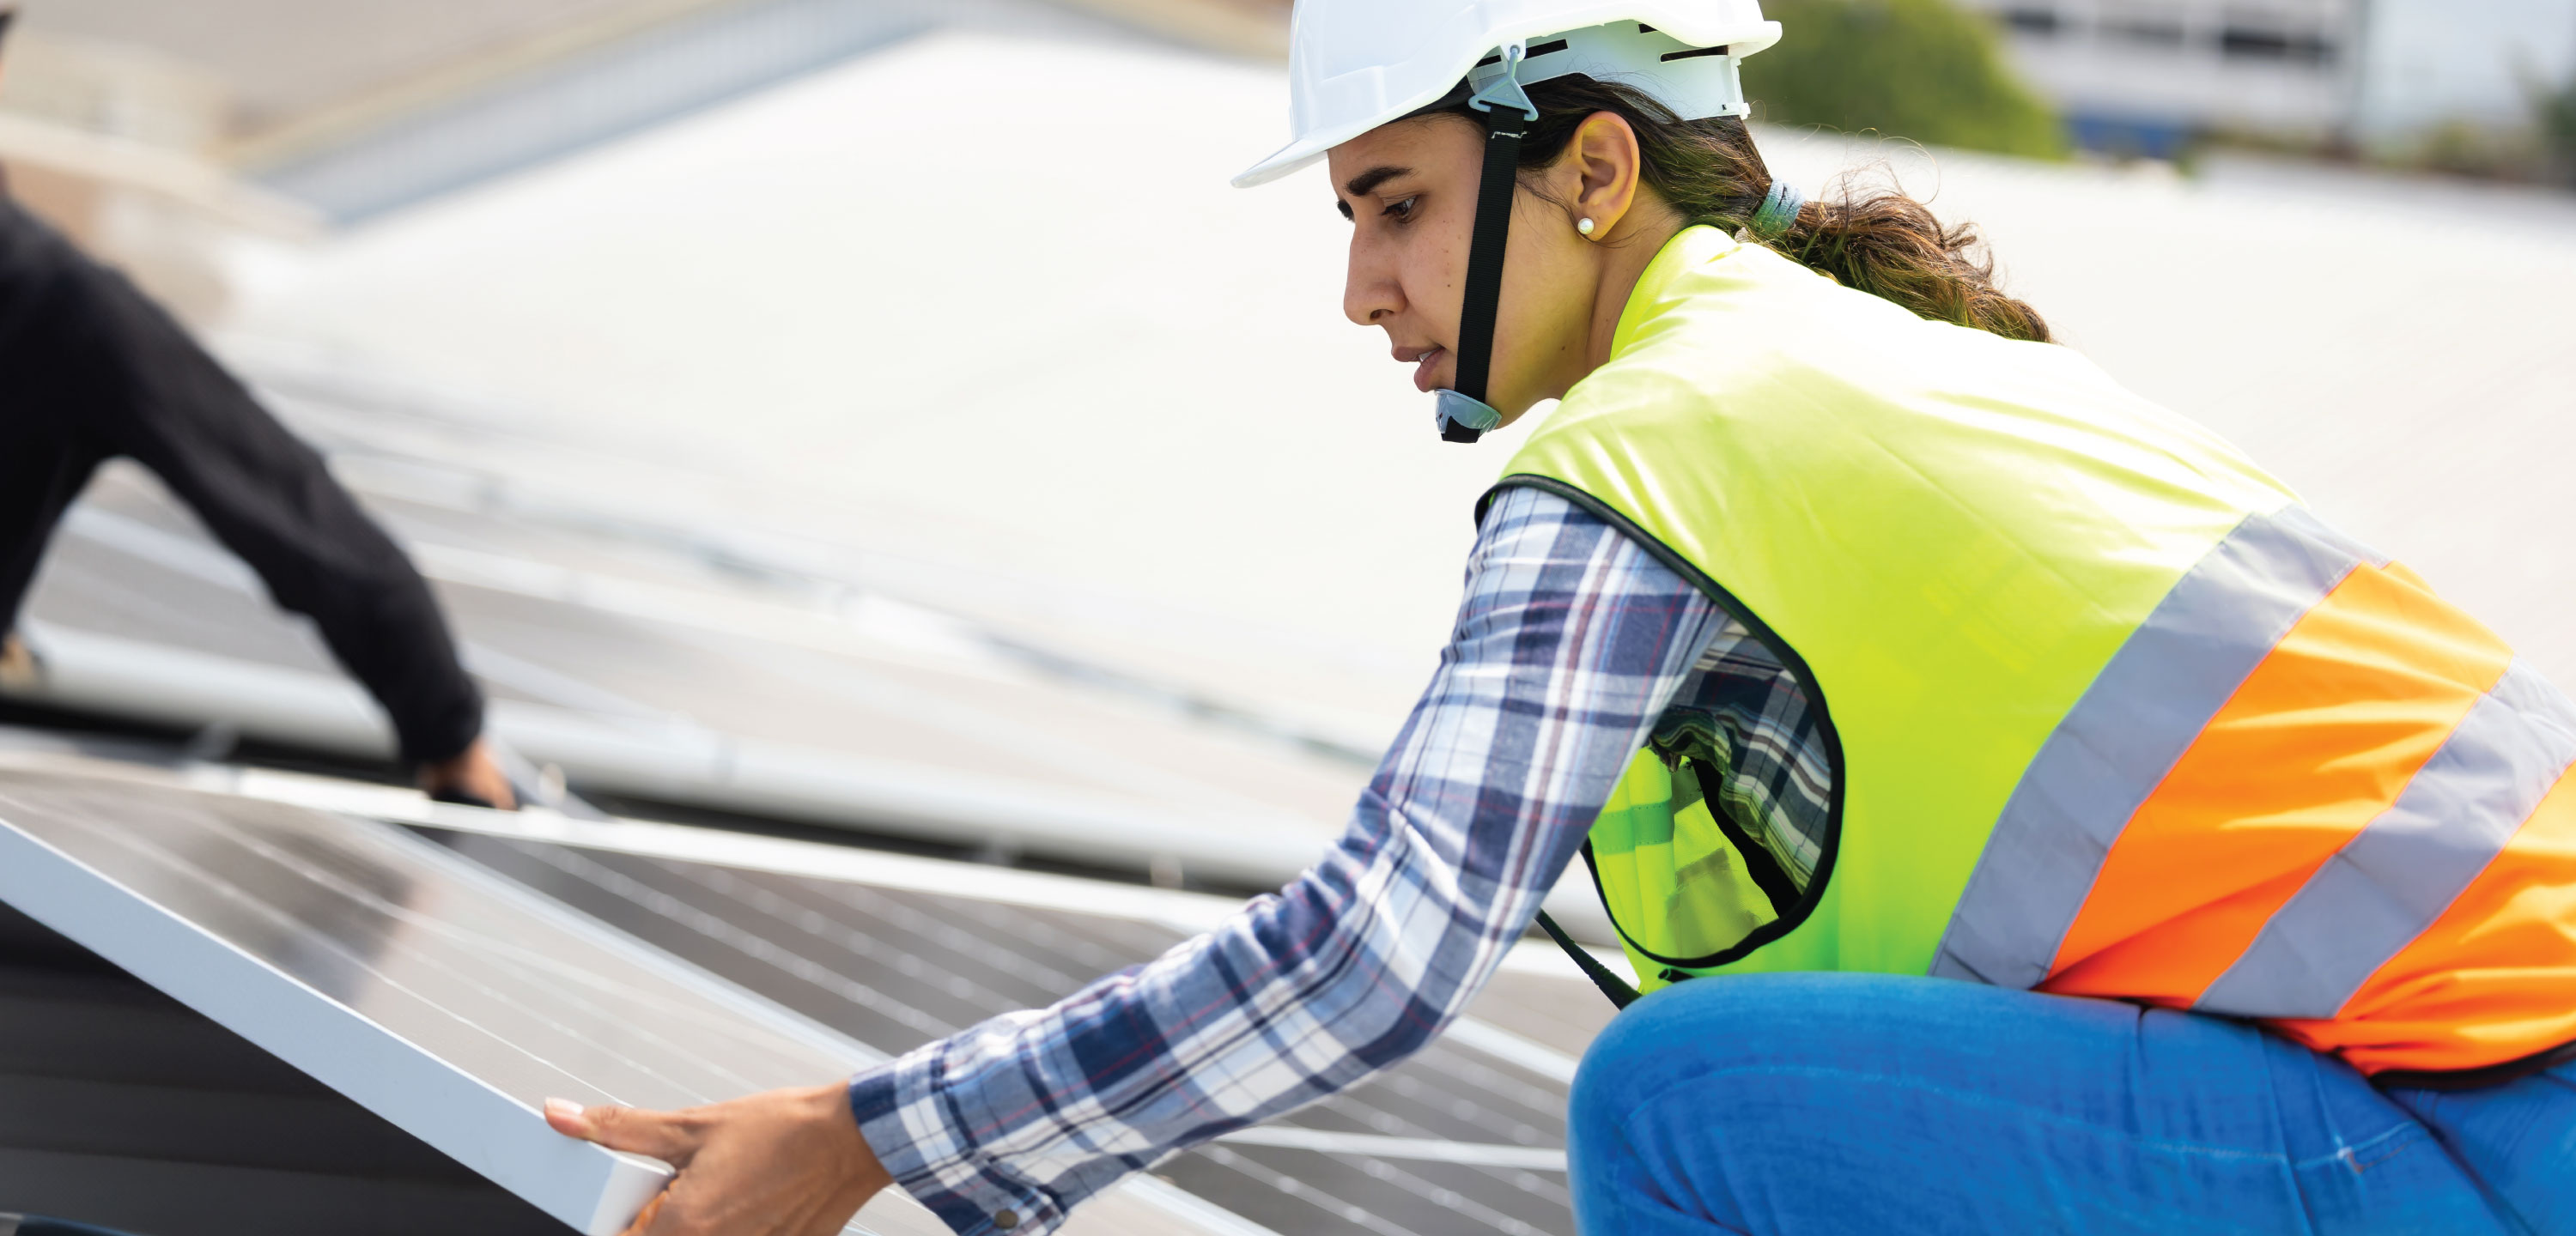 Women in solar: Key facts, statistics, and trends